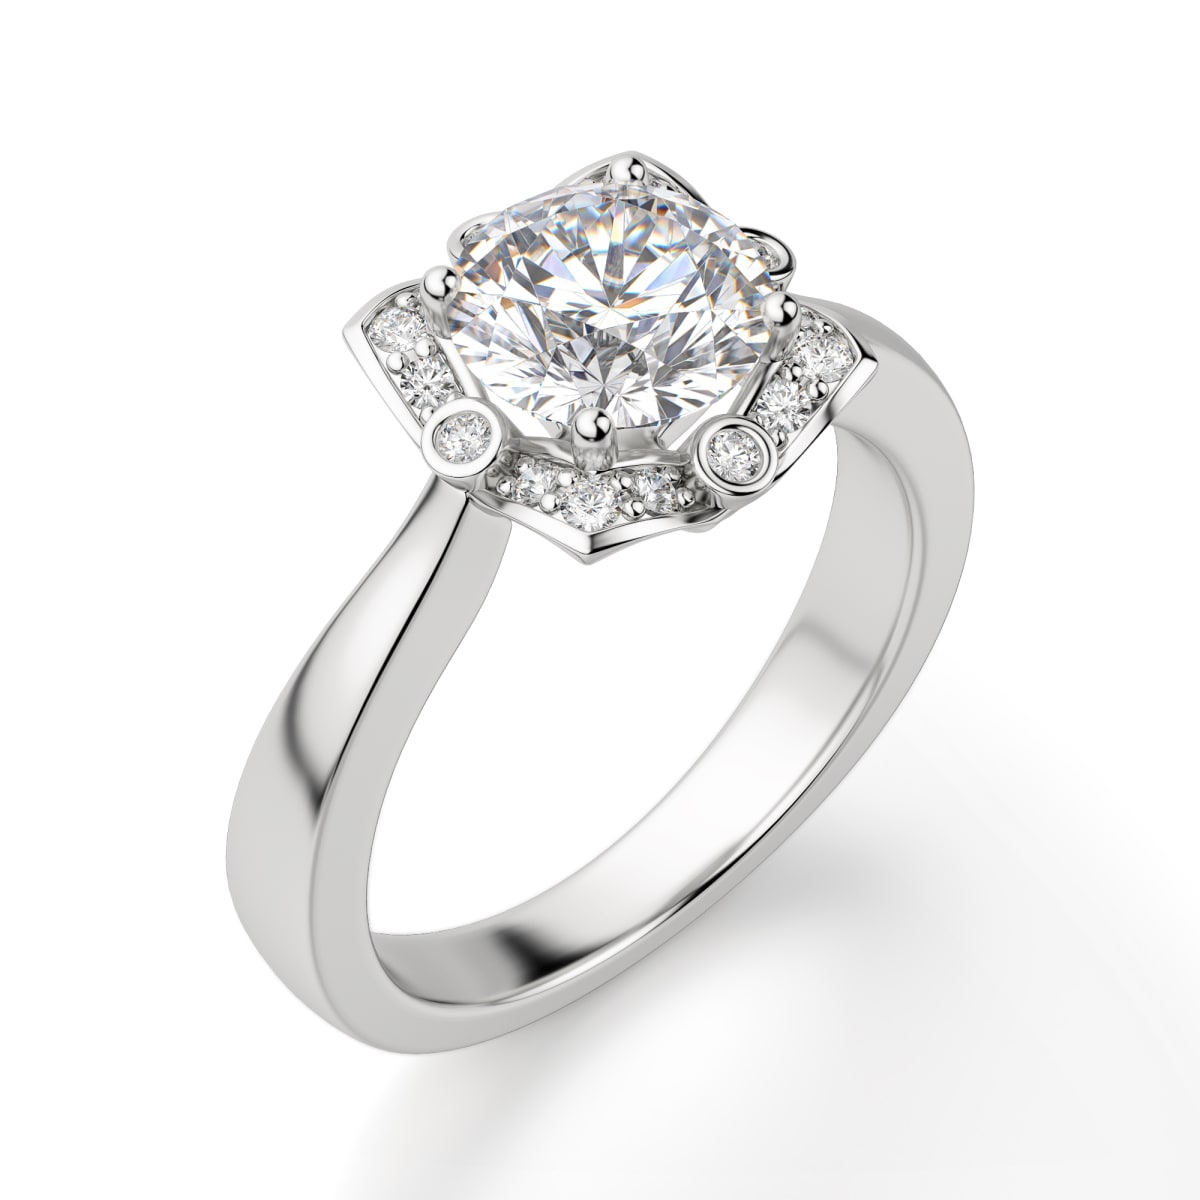 Edelweiss Round Cut Engagement Ring